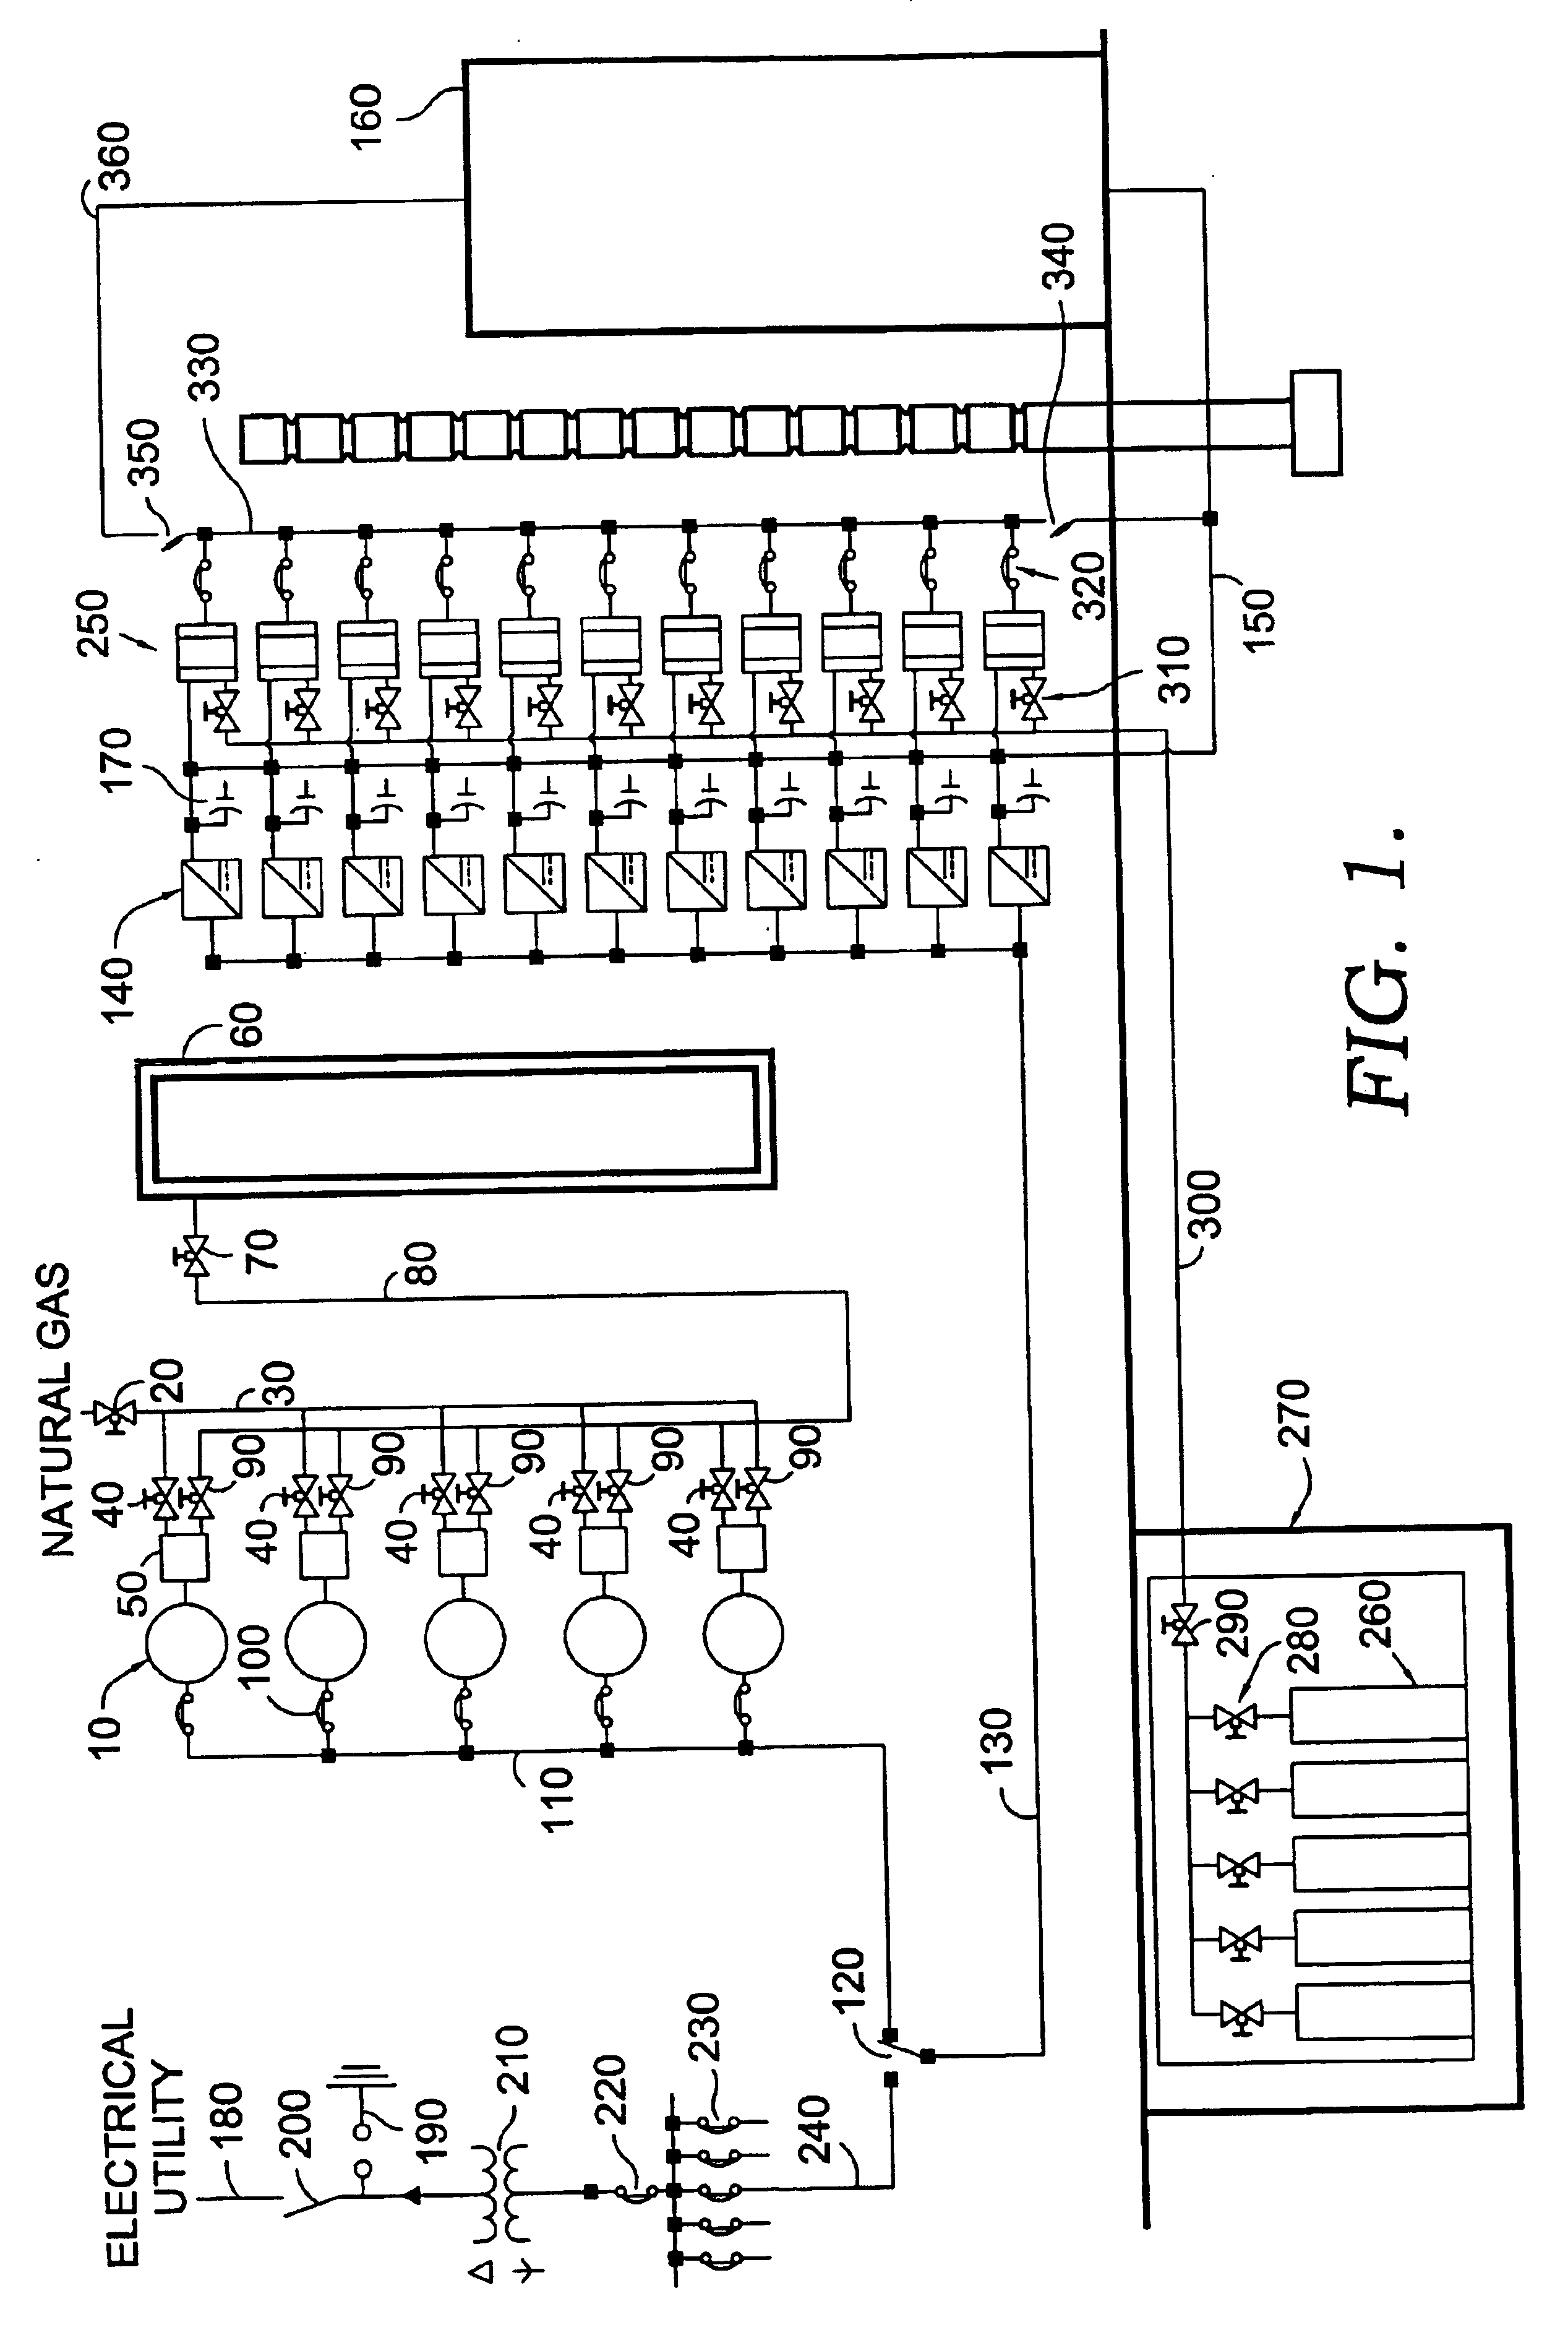 Proton exchange membrane based power system for a telecommunication facility